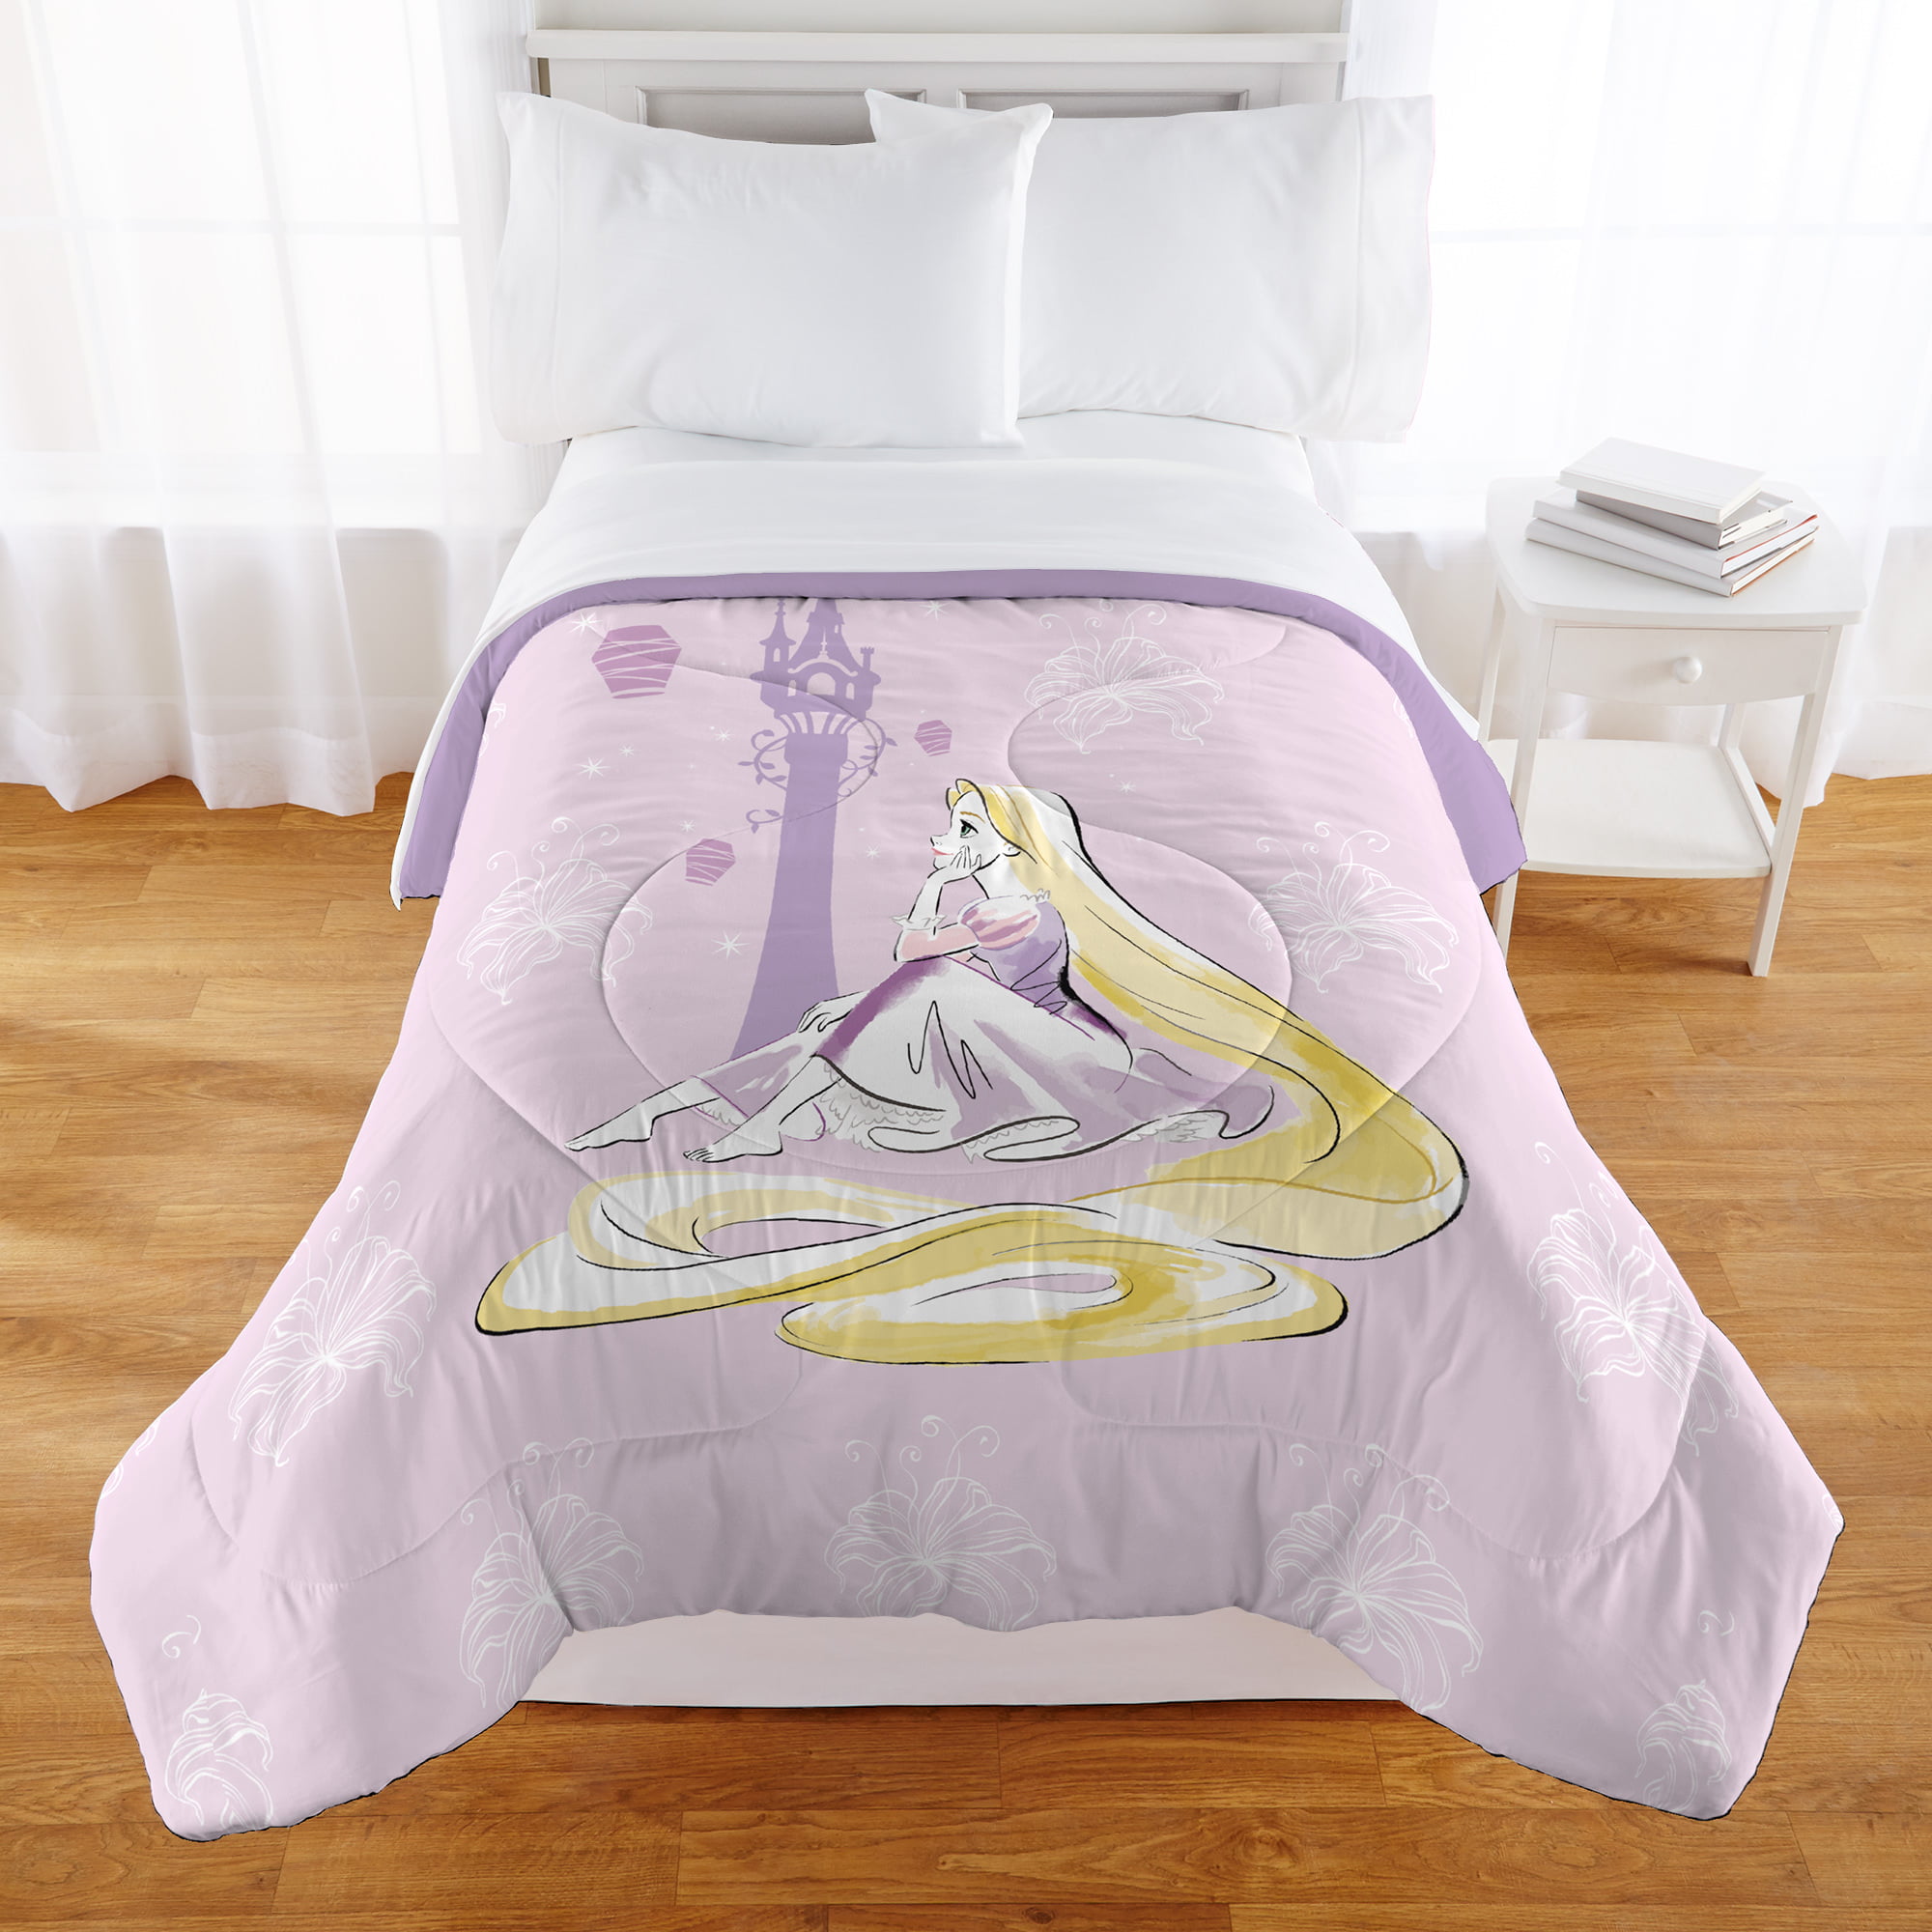 Princess Tangled Beyond The Dream Comforter Full 5 pieces Sheet Set Bed in a bag 